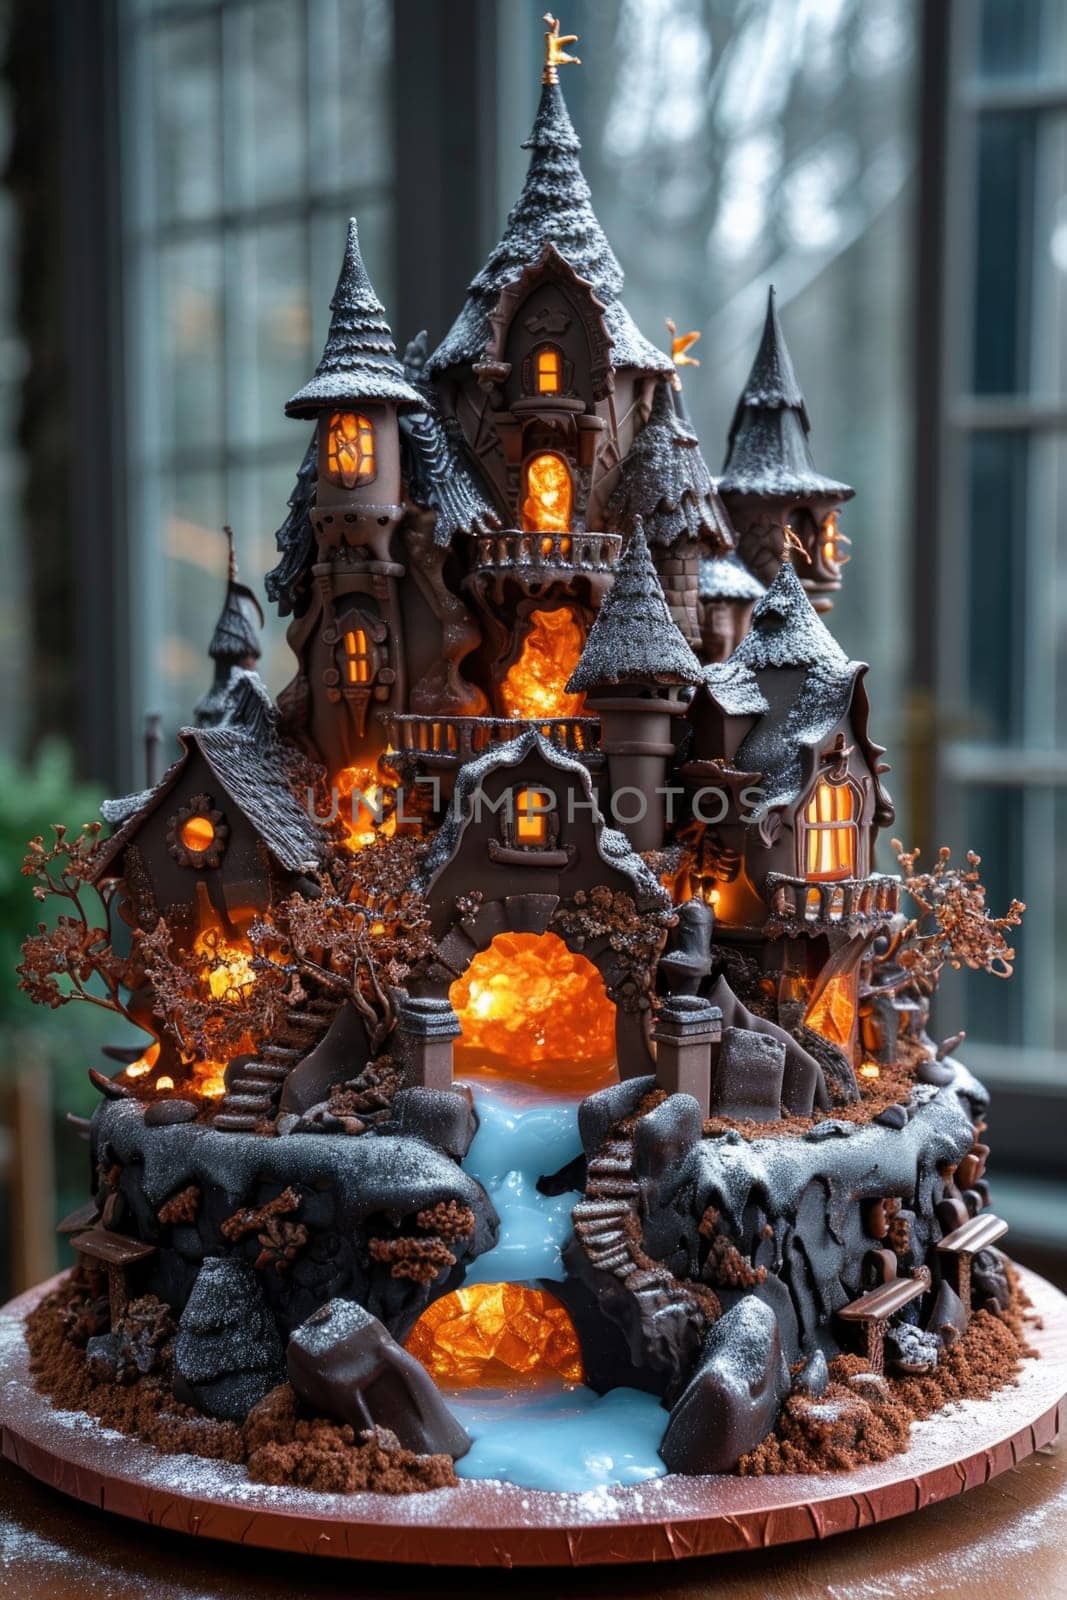 A designer large handmade chocolate cake castle stands on the table by Lobachad